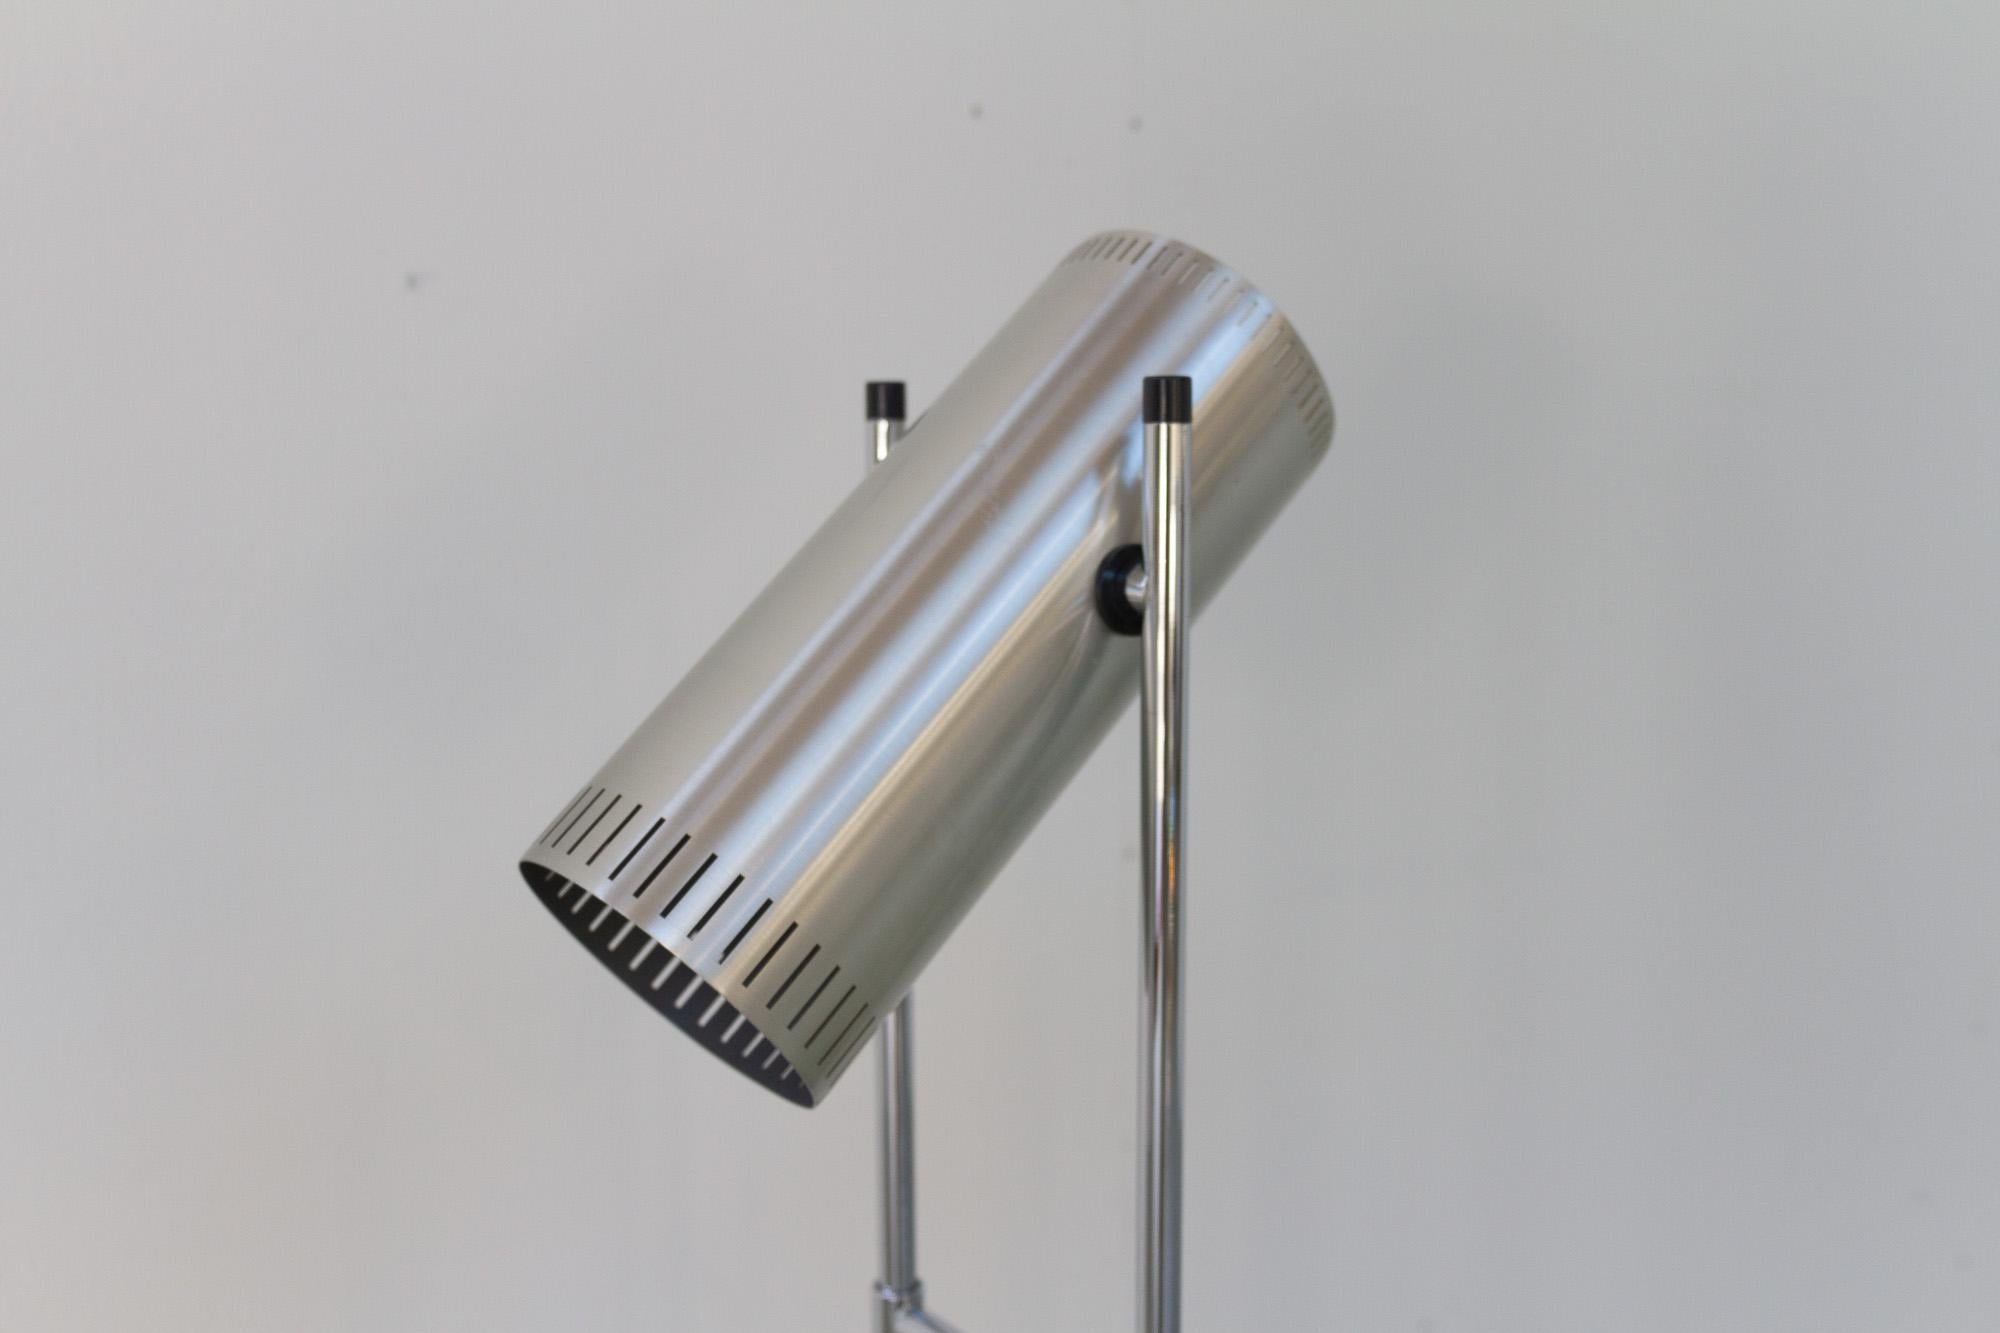 Trombone floor lamp by Jo Hammerborg for Fog & Mørup, 1960s.
Danish Mid-Century Modern tall floor lamp in lacquered aluminium and chrome. Cylindrical head with row of slits along bottom and top. Switch on top. Angel of head is adjustable. Two